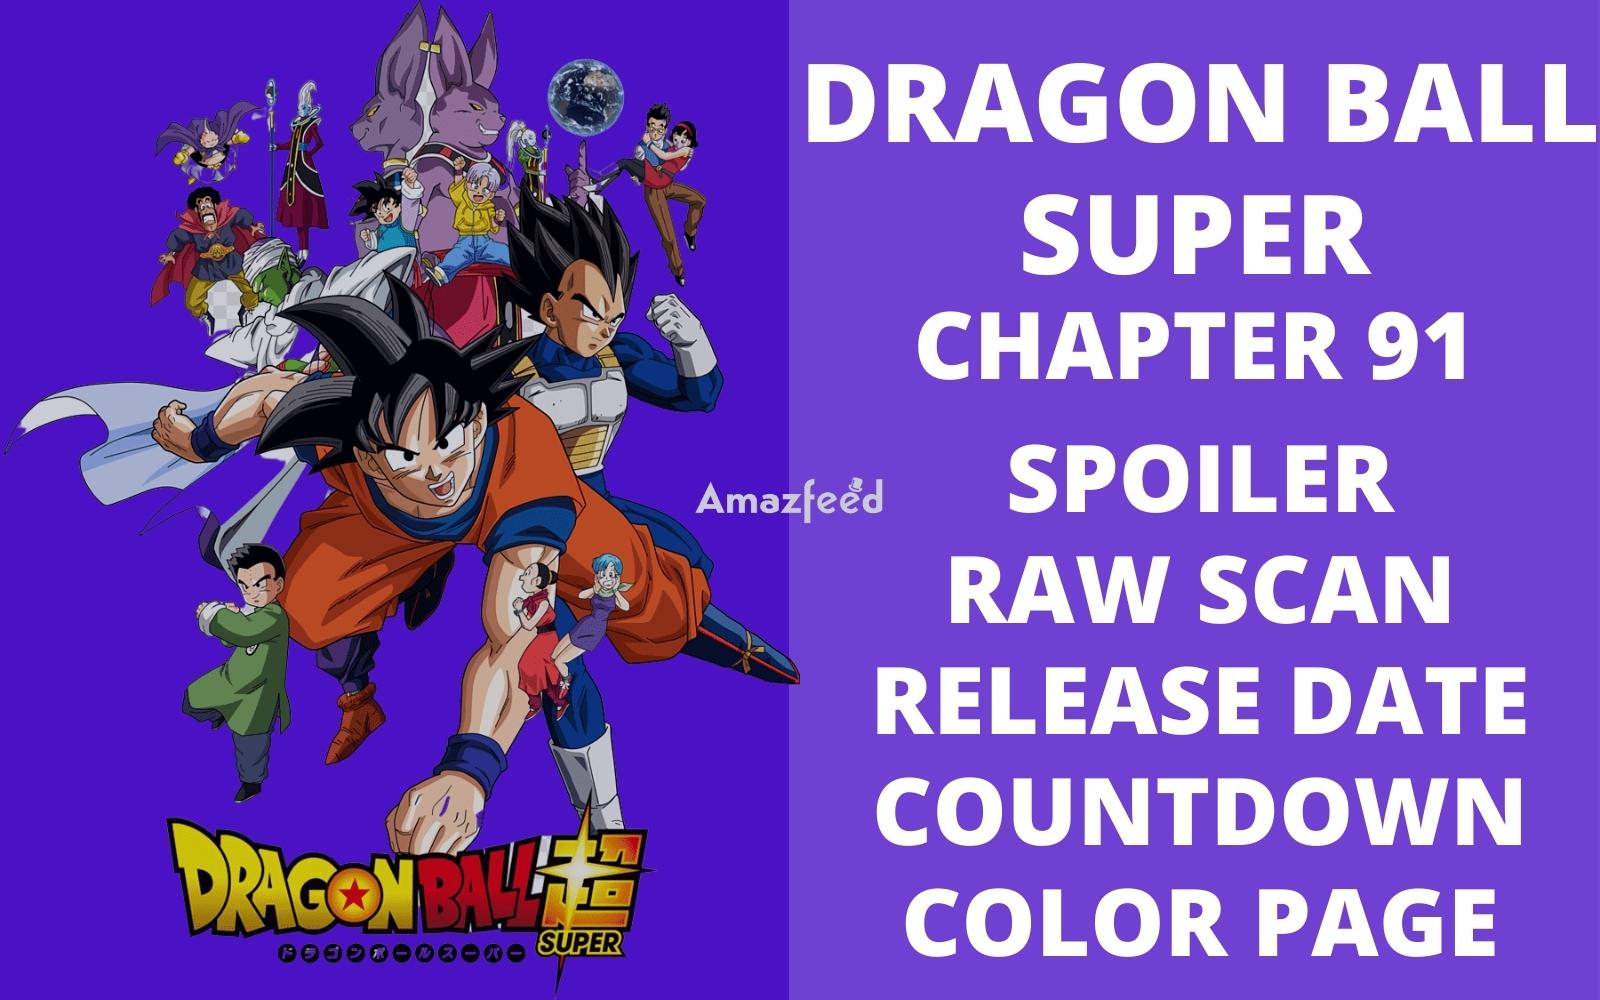 Dragon Ball Super Chapter 91 Spoiler, Raw Scan, Color Page, Release Date